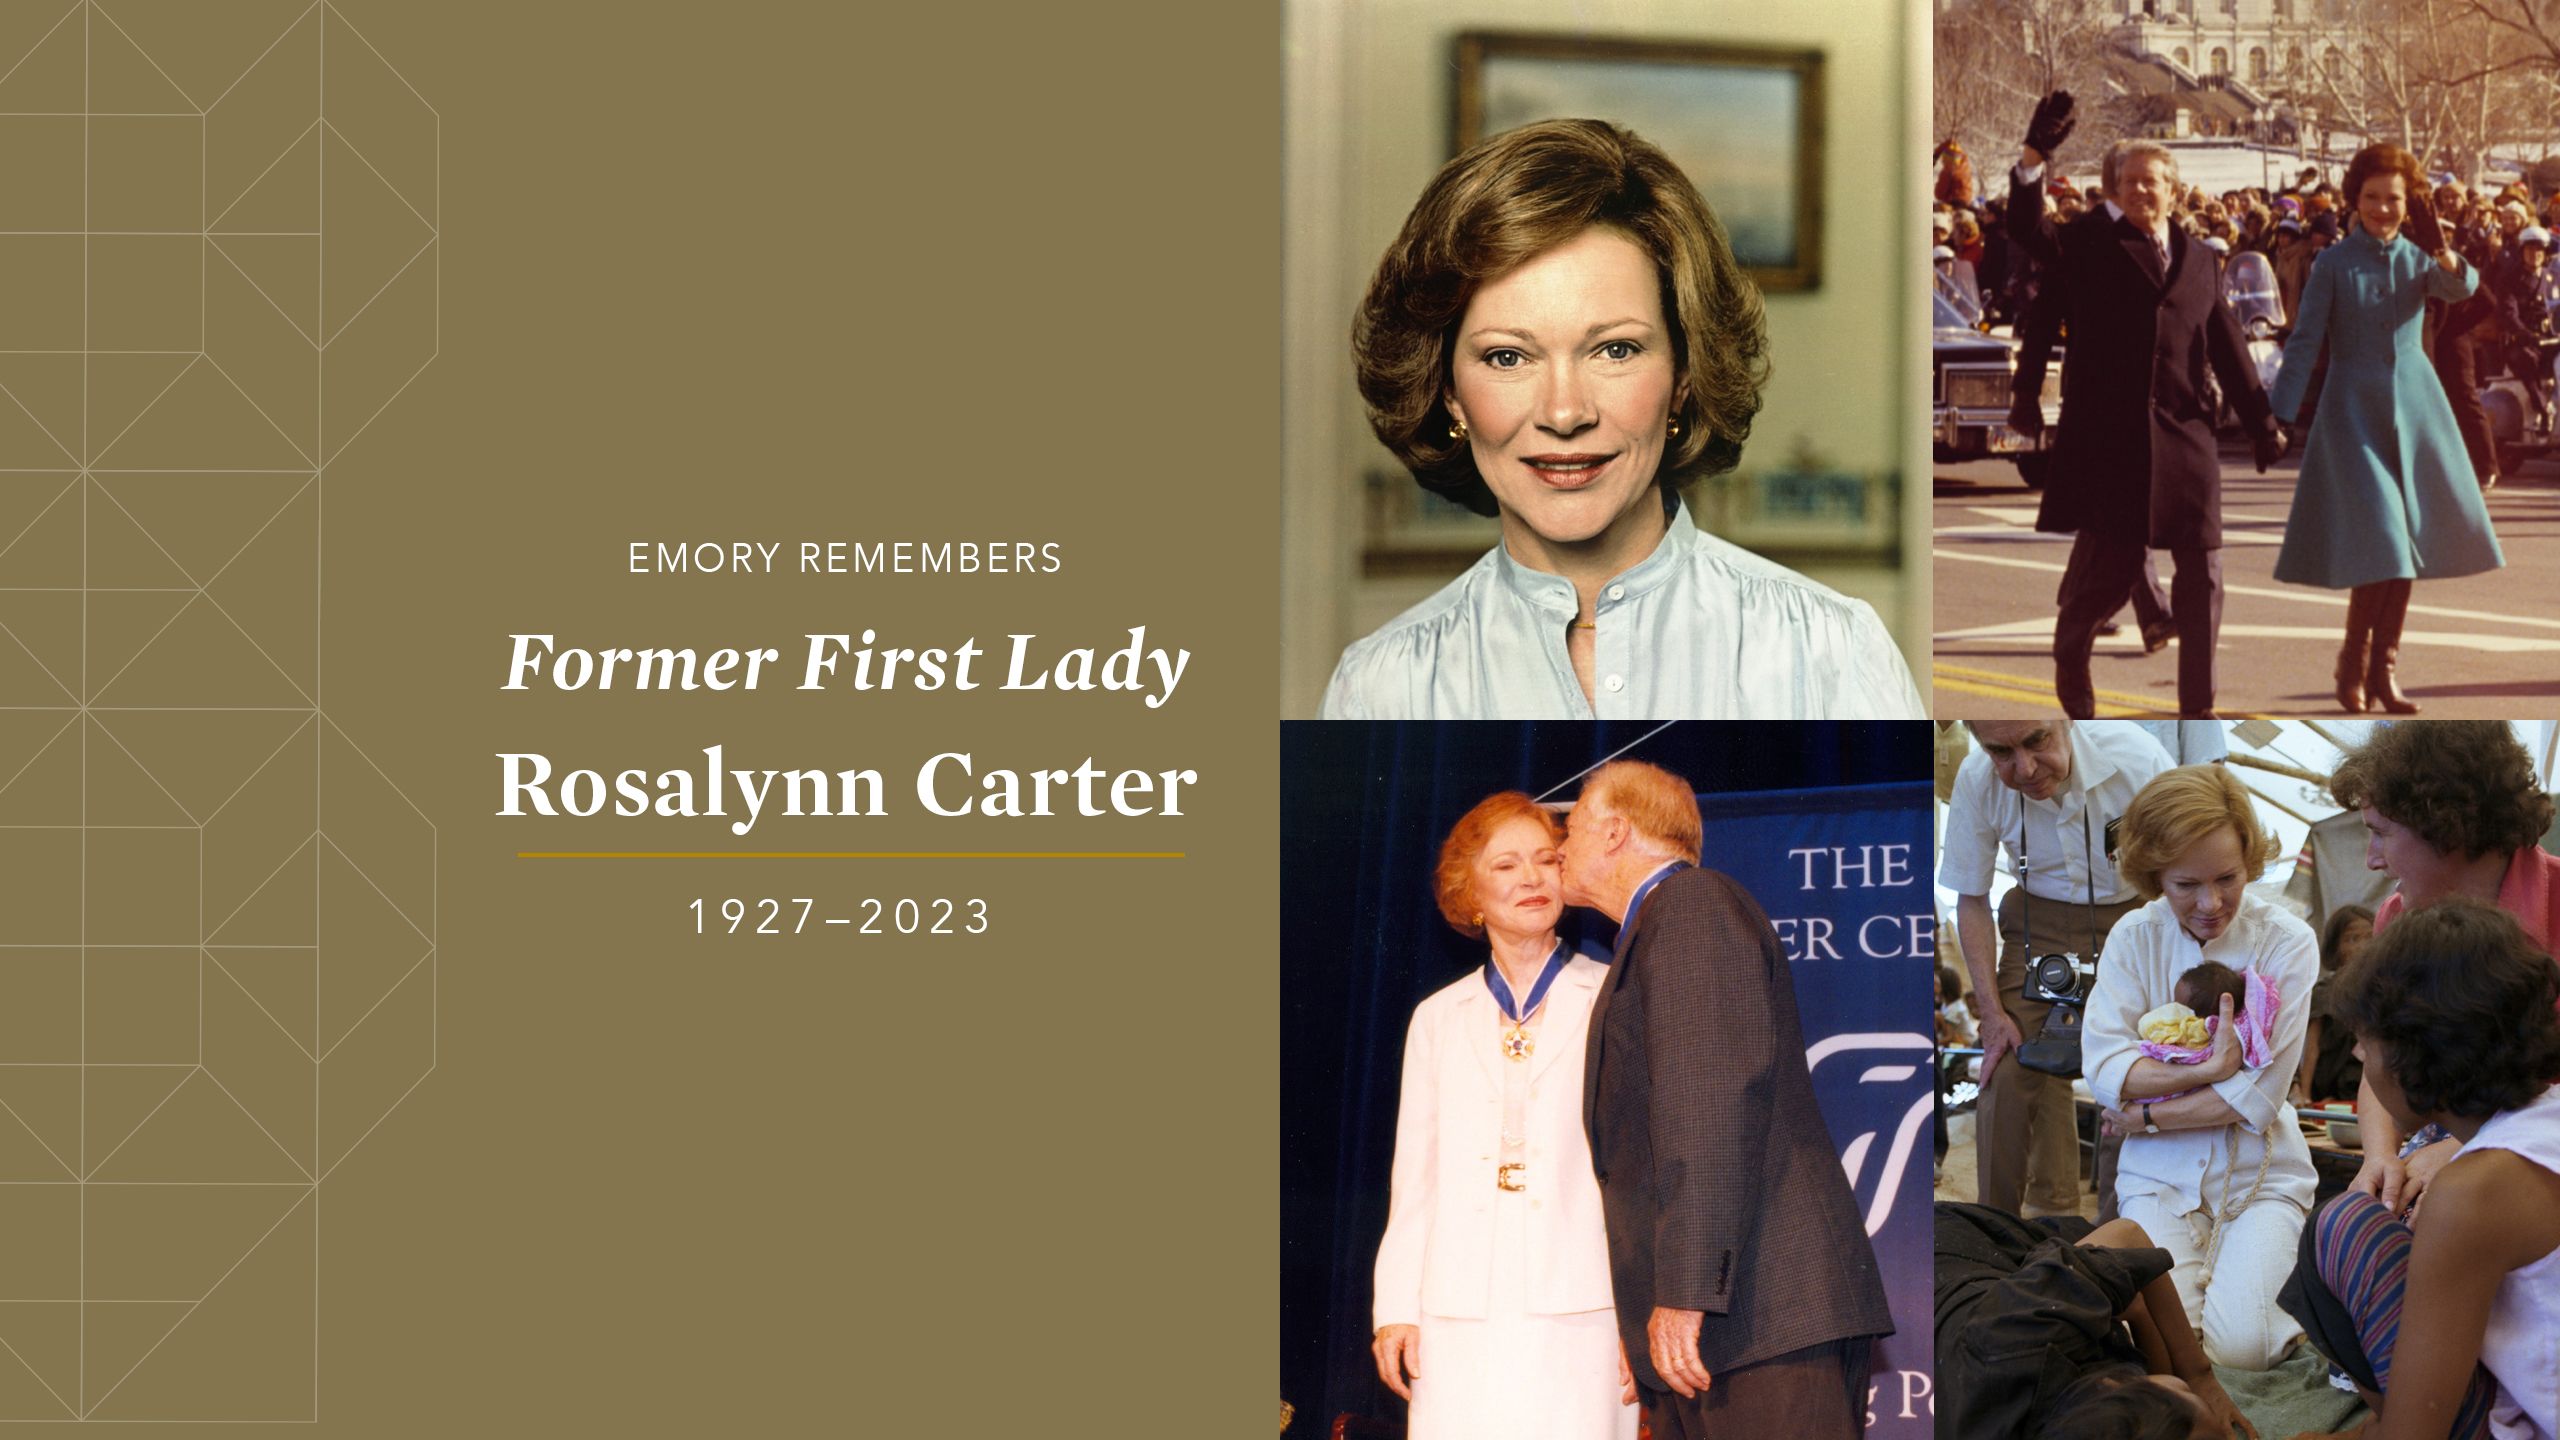 Emory Remembers Former First Lady Rosalynn Carter 1927-2023